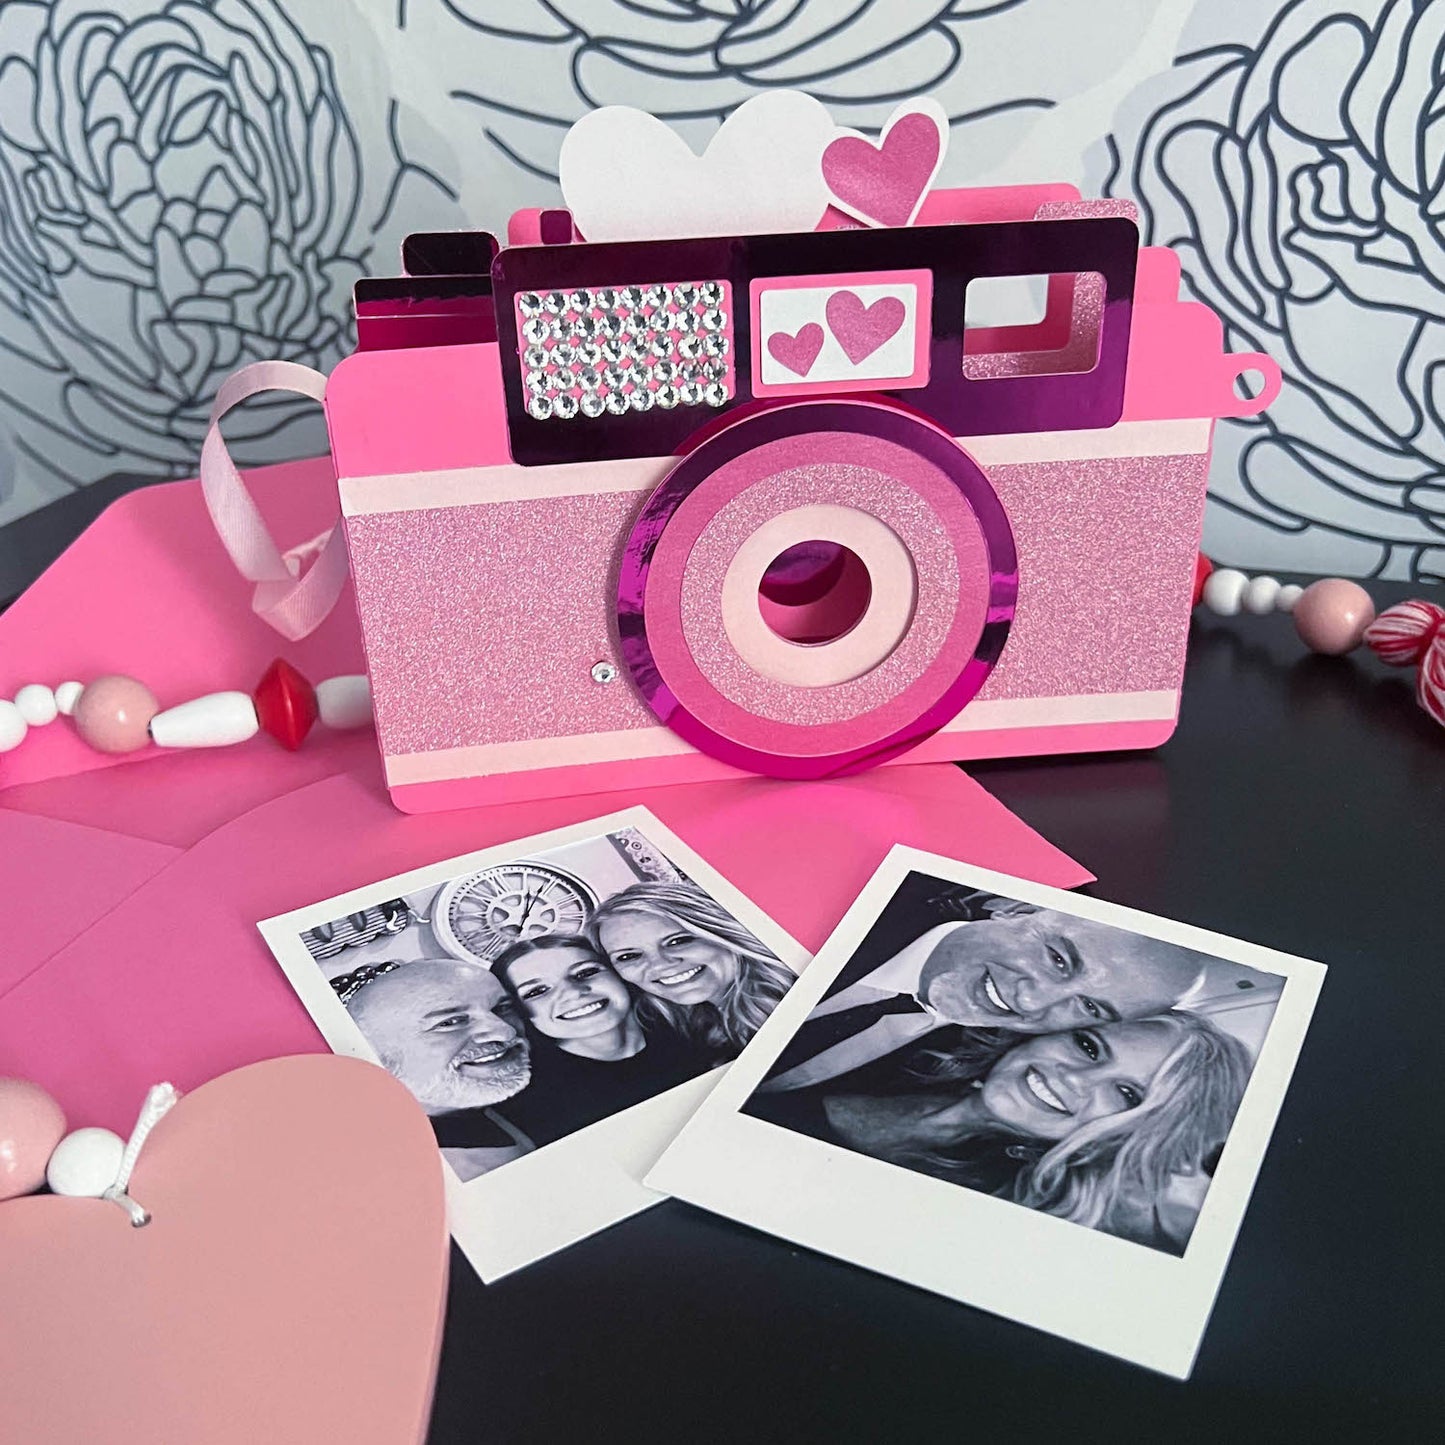 Valentine's Day pop-up camera card usingpink glitter and mirror 